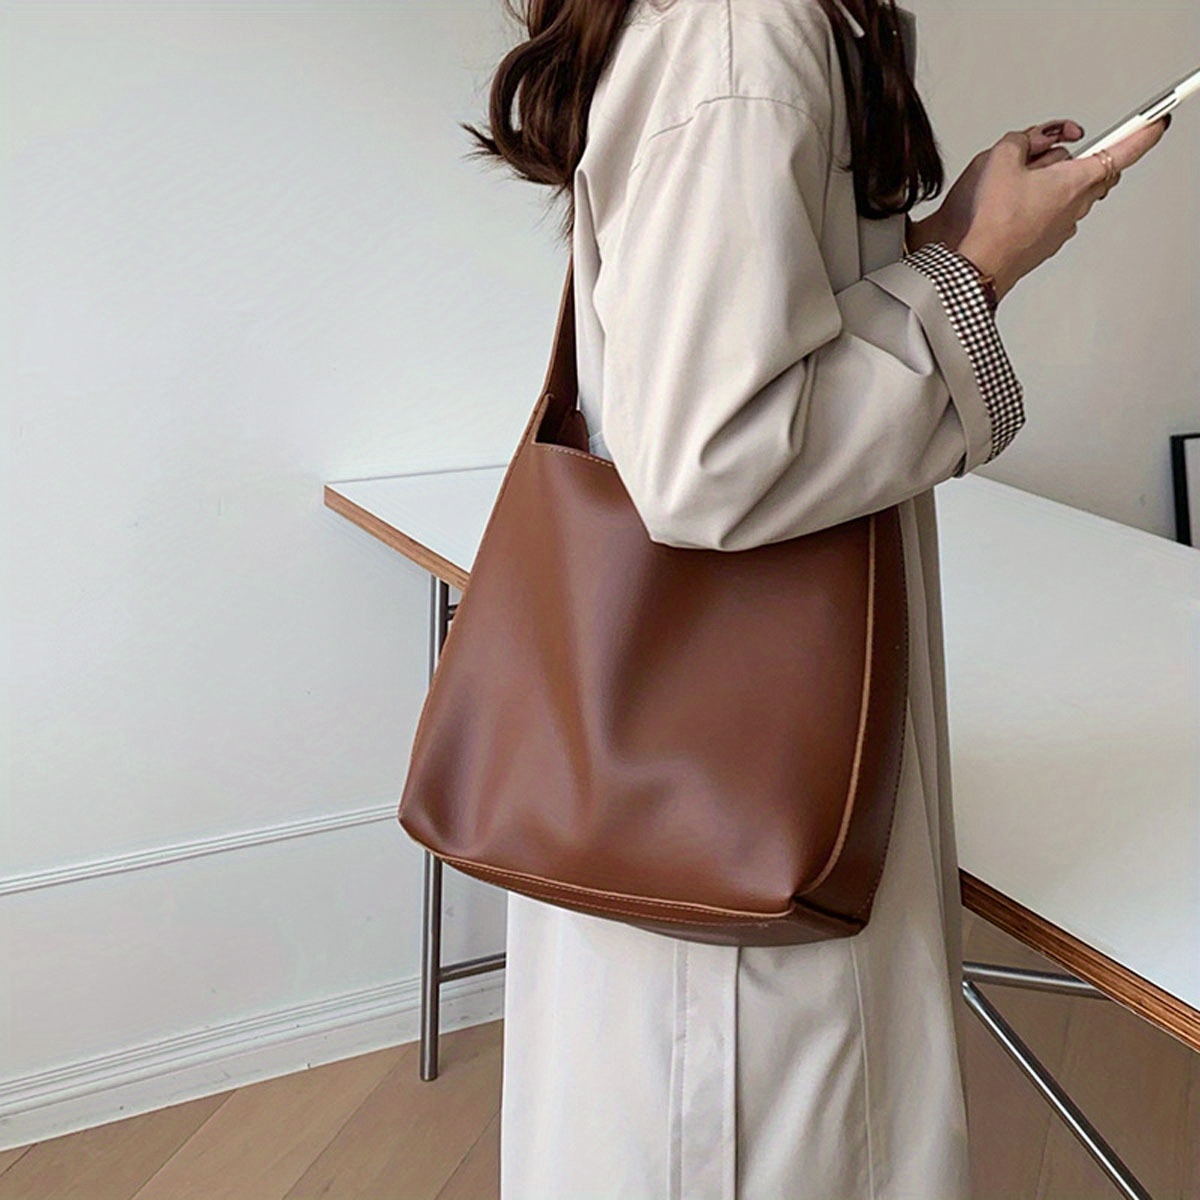 Lizzy - Faux Leather Tote Bag